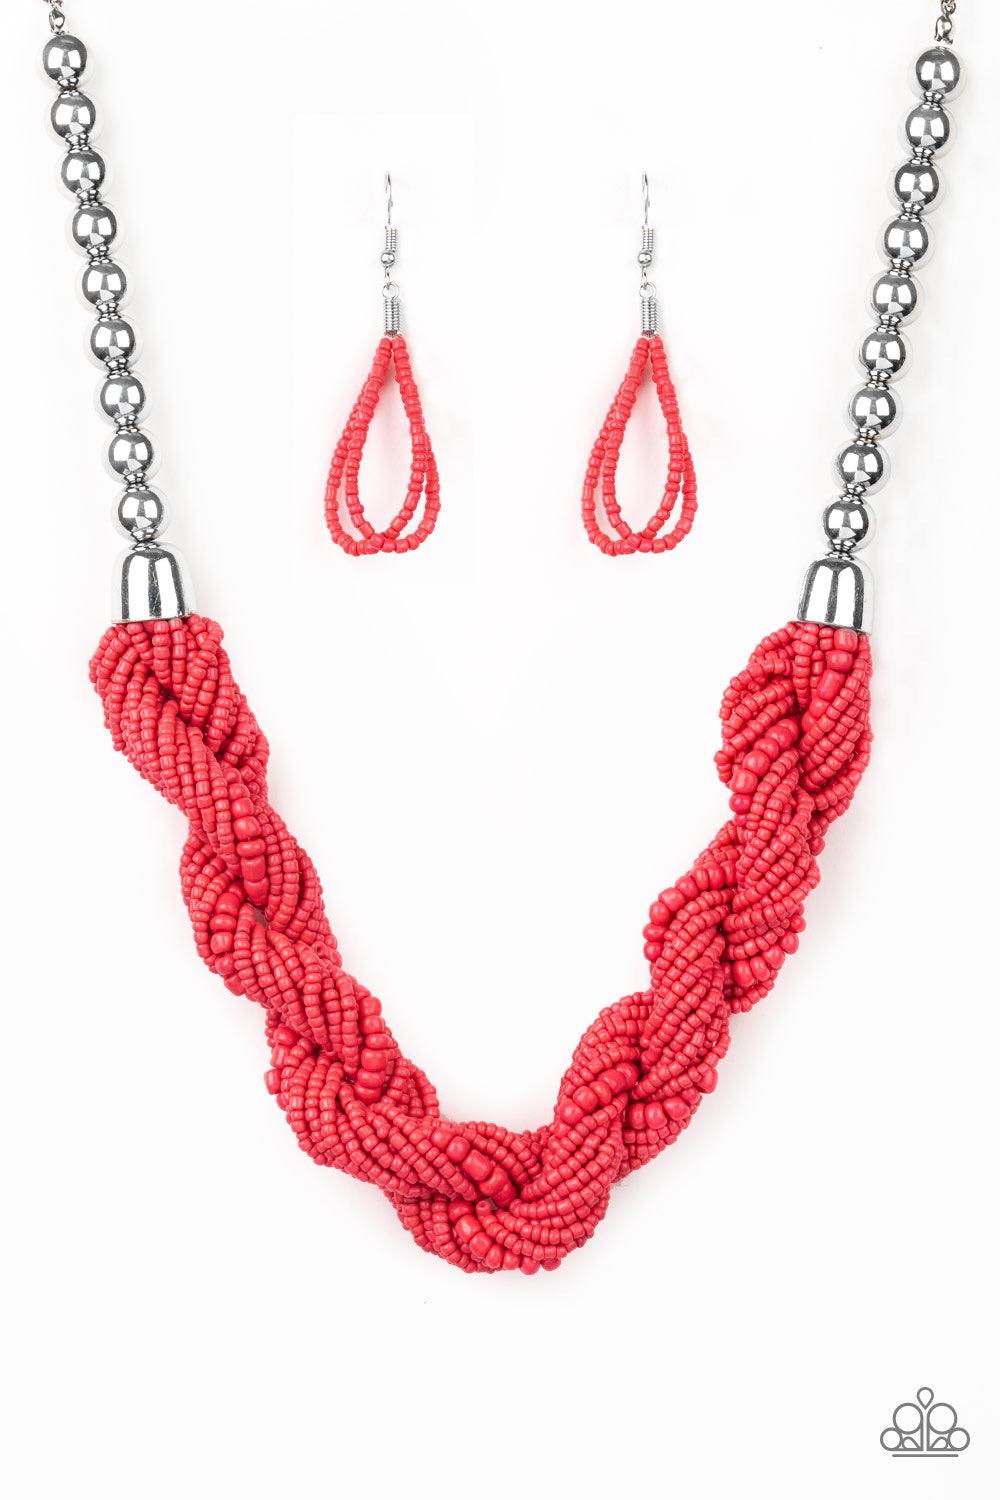 Paparazzi Accessories Savannah Surfin - Orange Glistening silver beads give way to strands of twisted Living Coral seed beads below the collar for a summery flair. Features an adjustable clasp closure. Jewelry